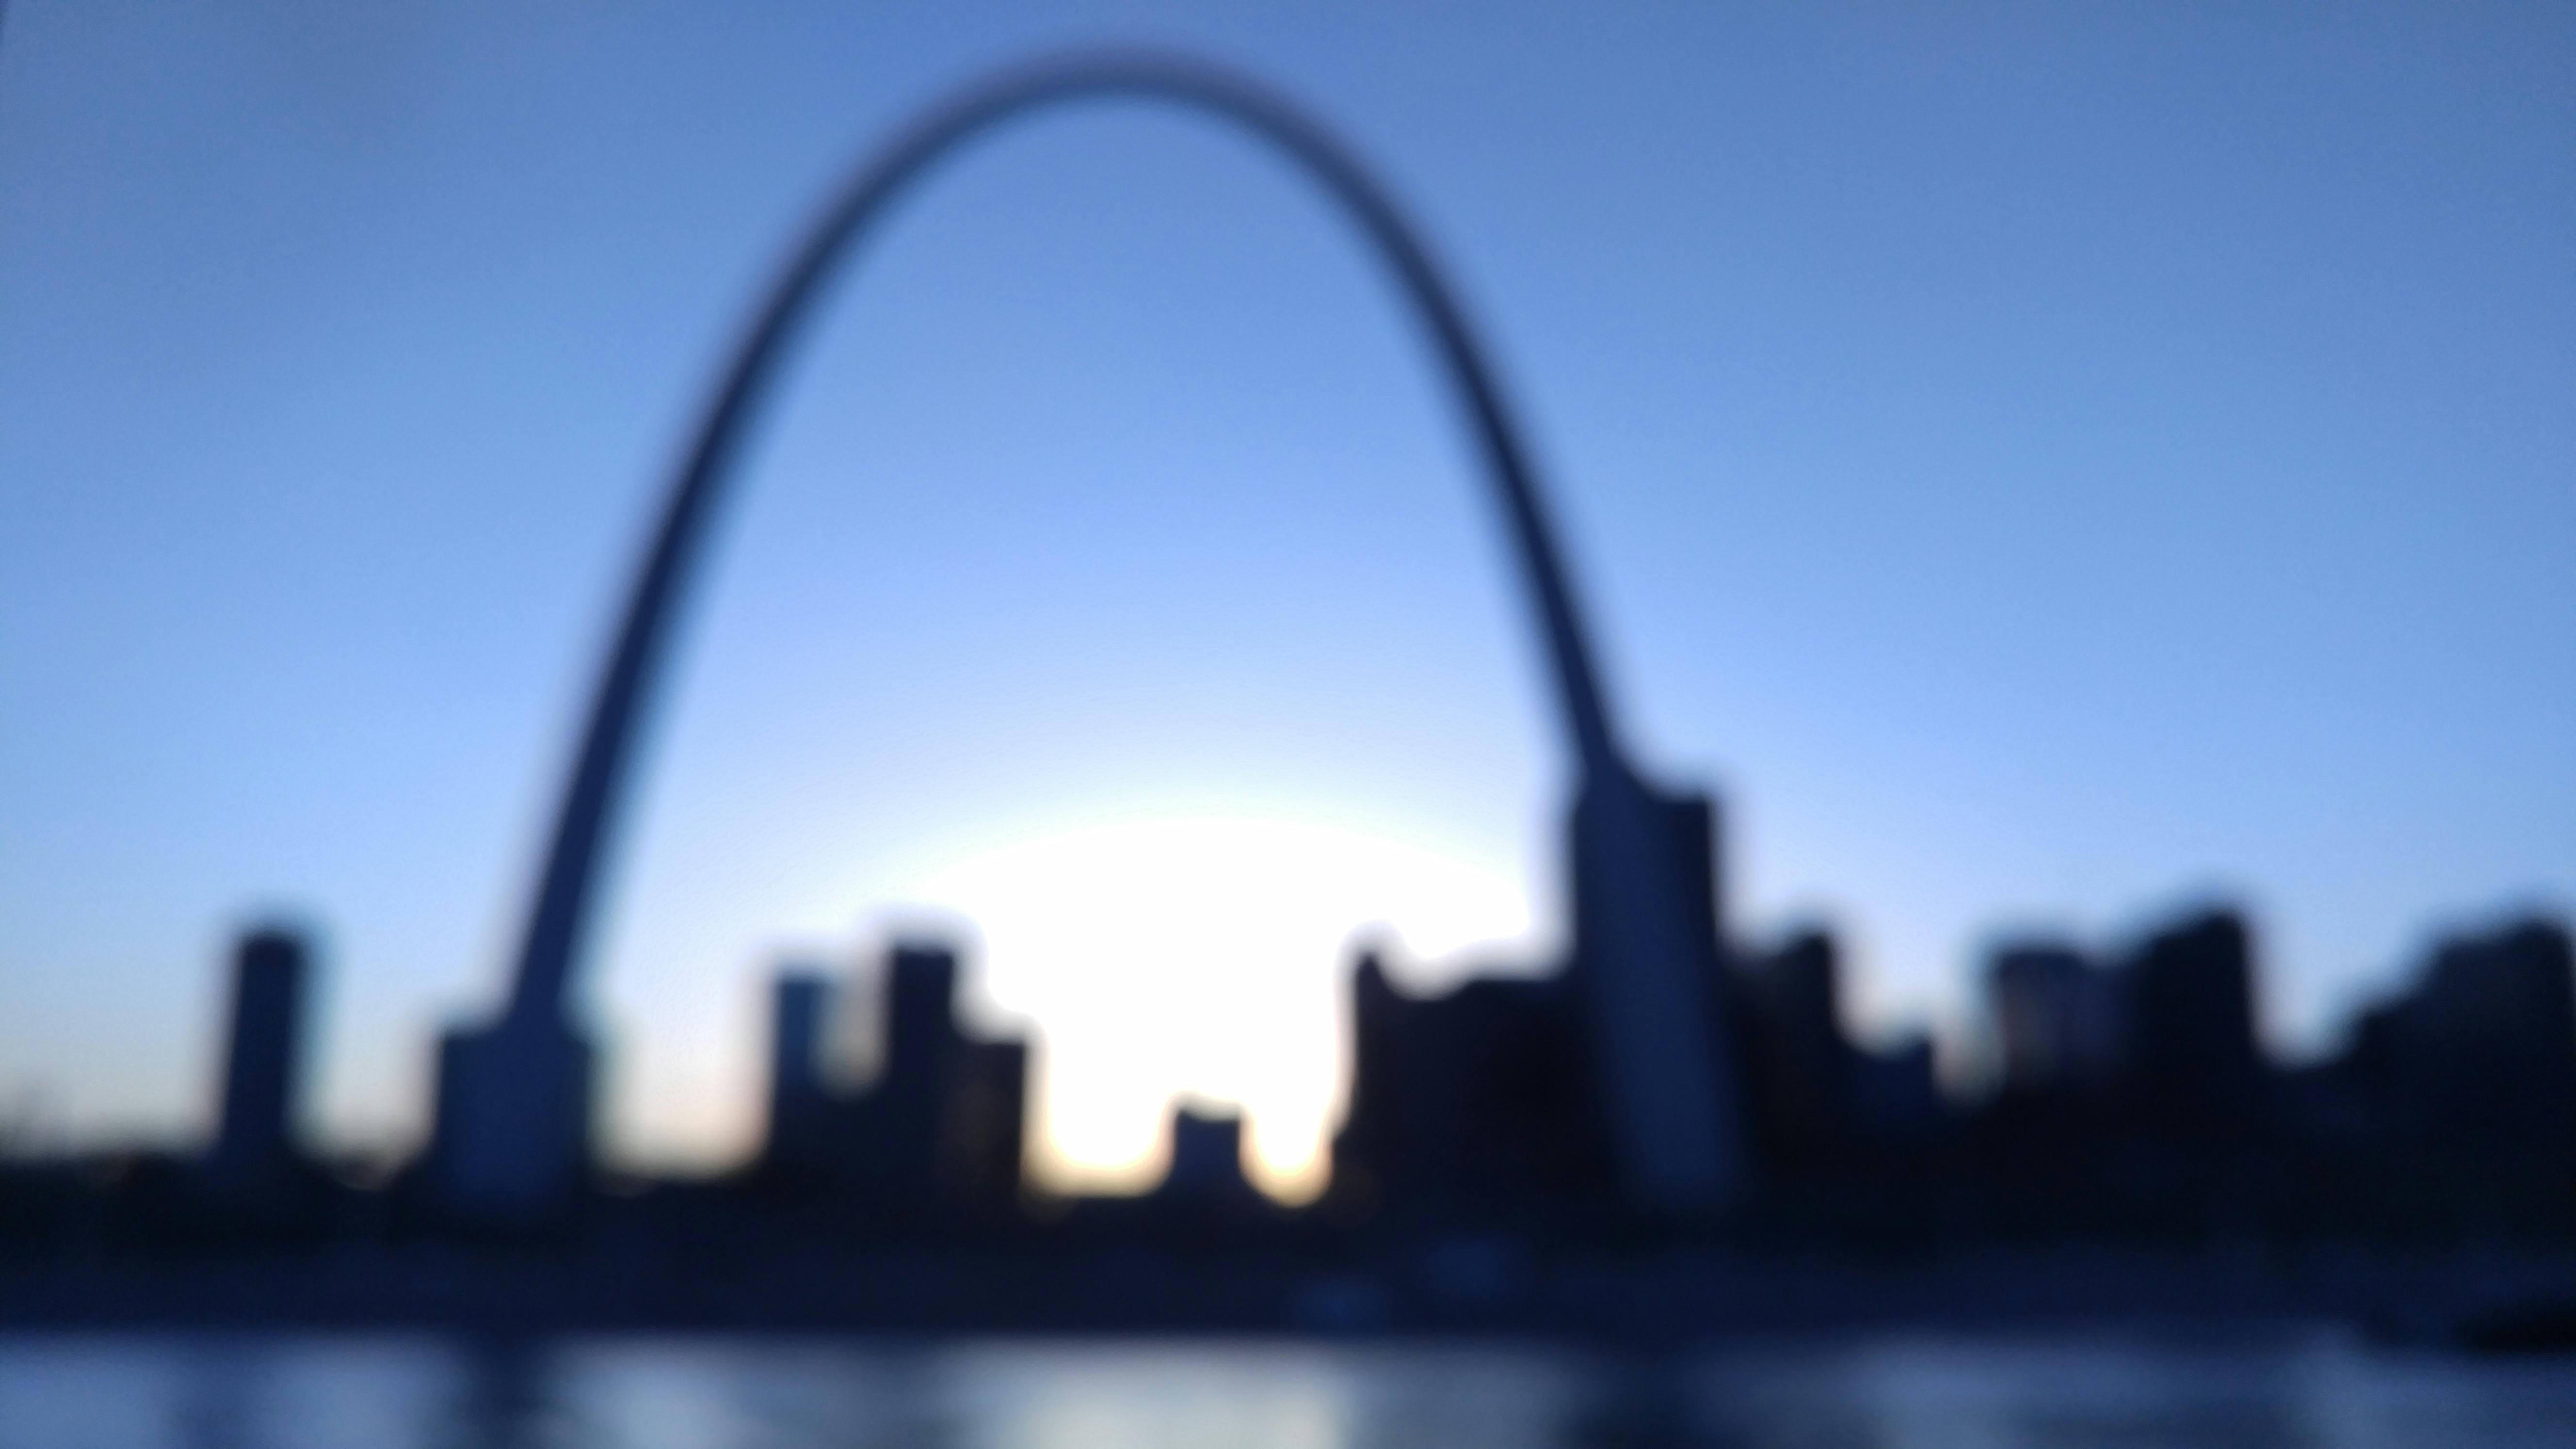 Free stock photo of St. Louis Arch